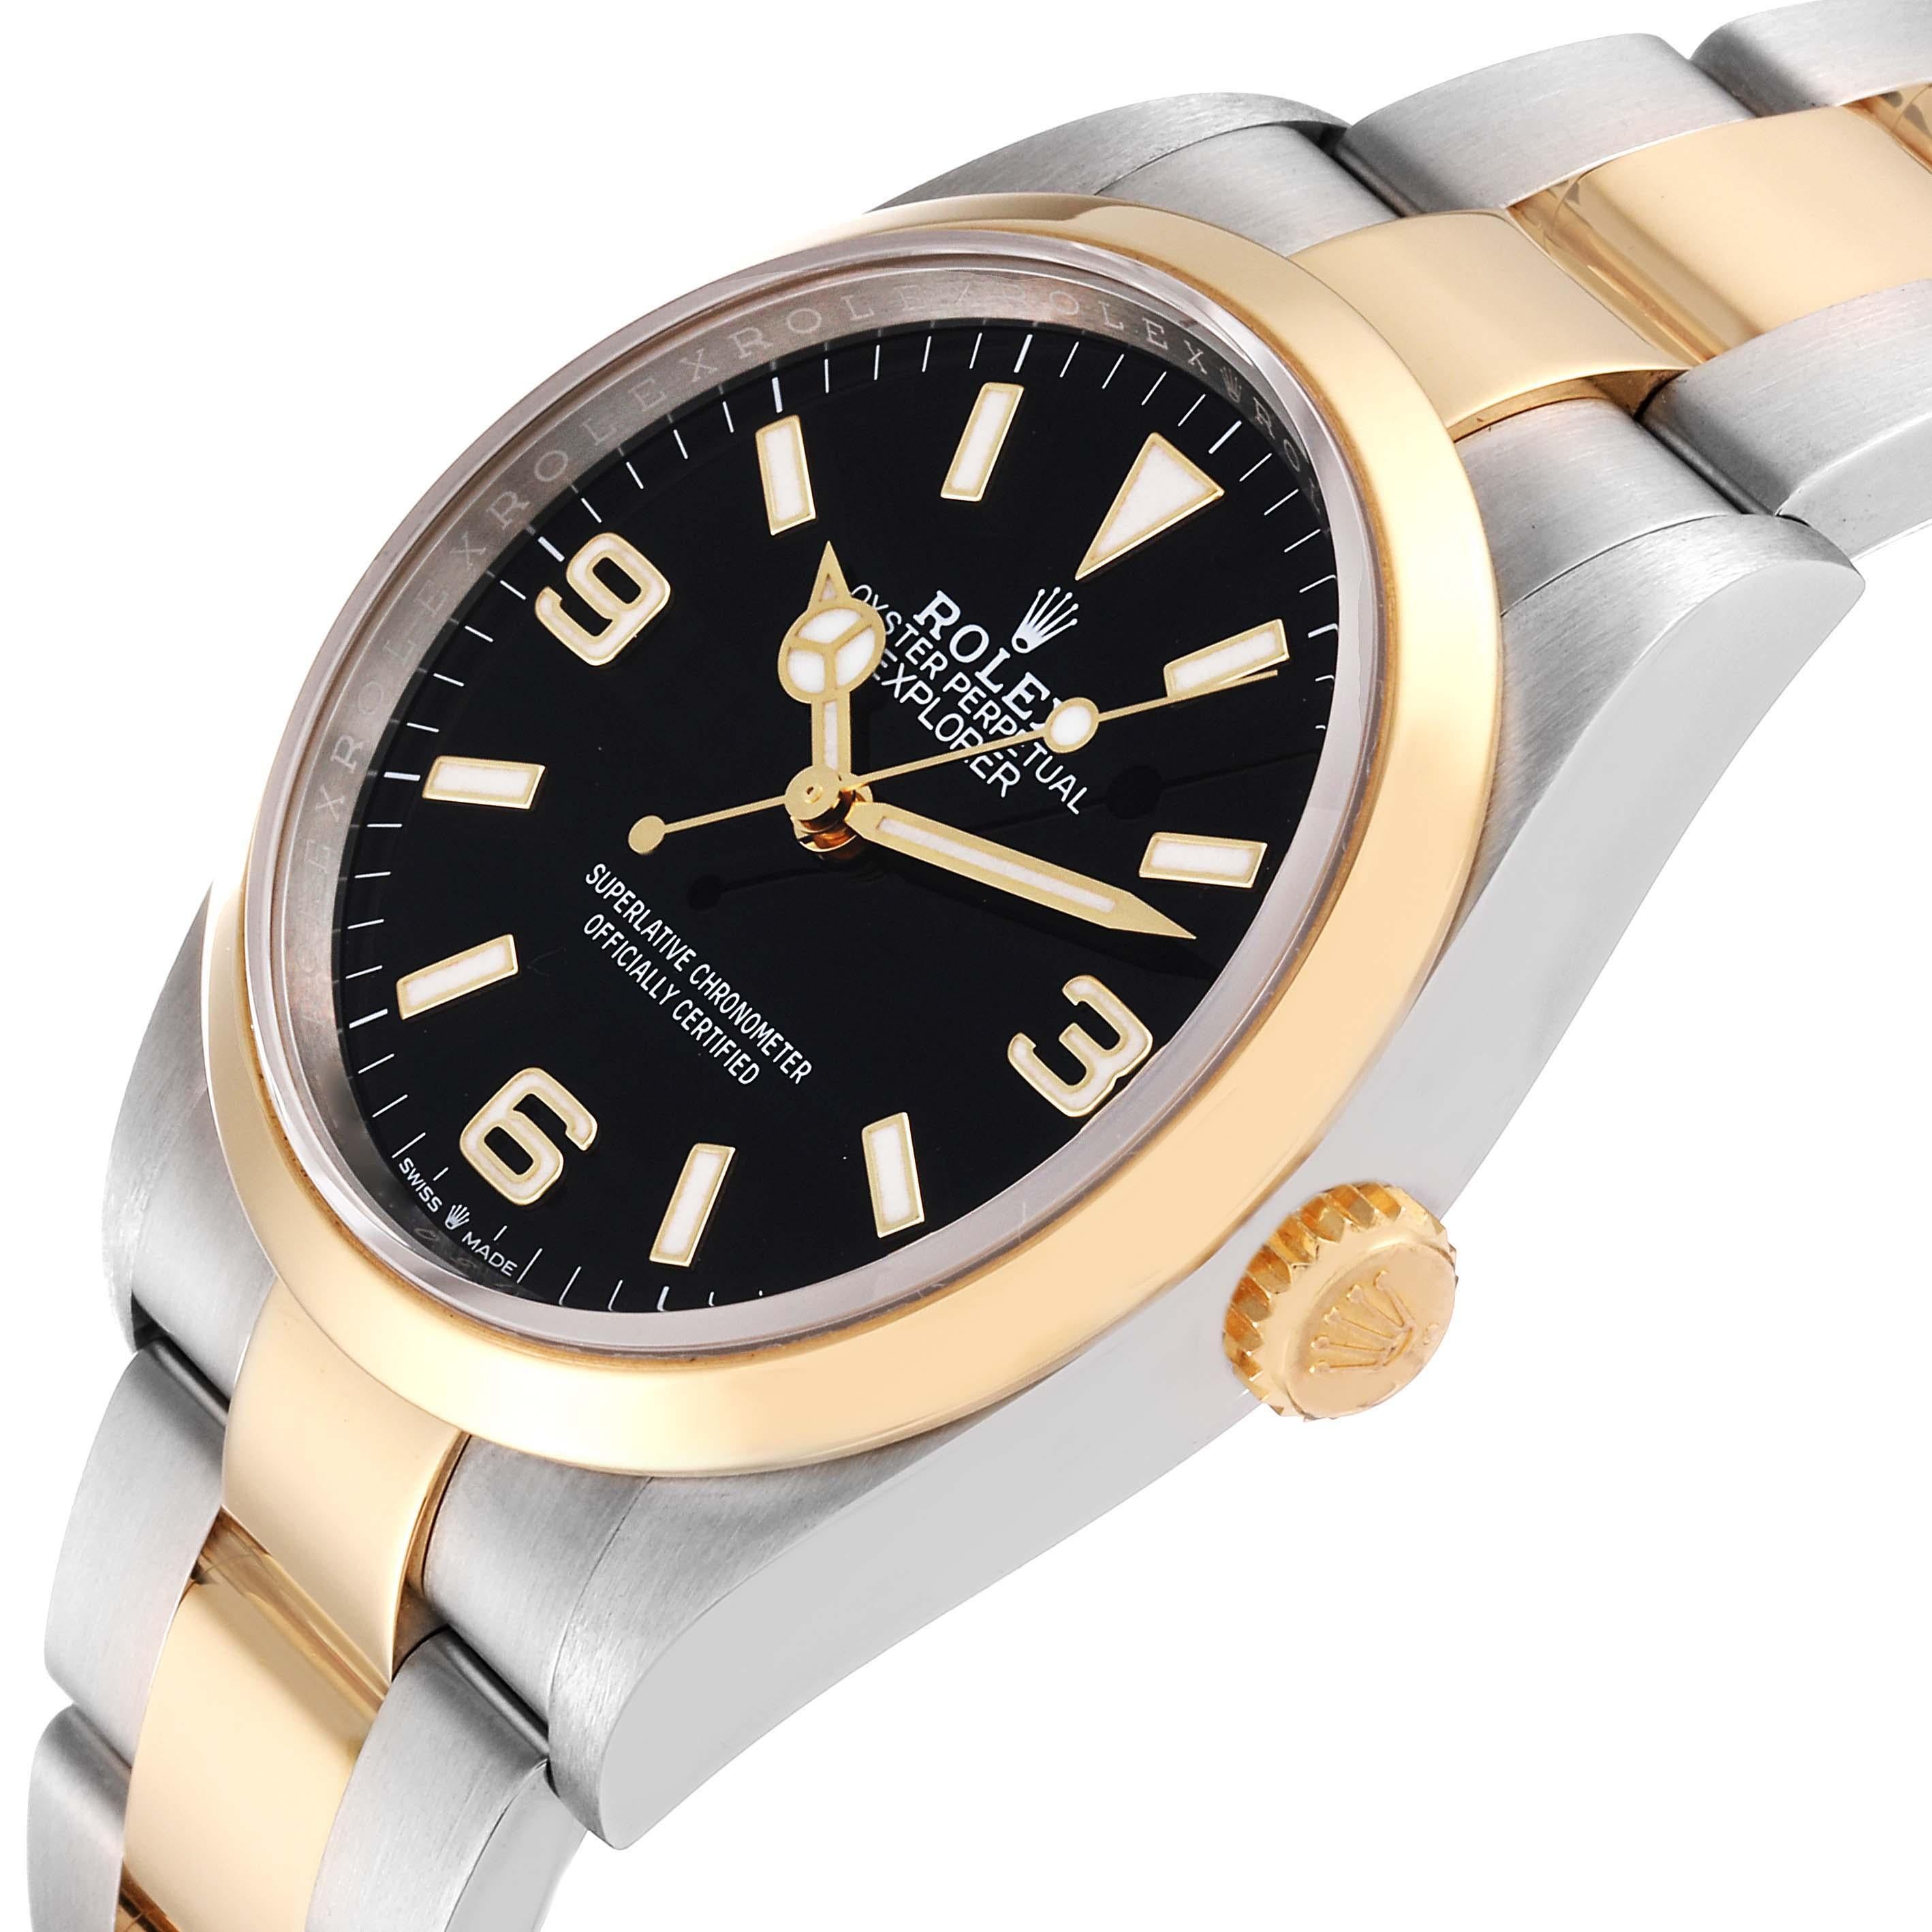 Rolex Explorer I Steel Yellow Gold Black Dial Mens Watch 124273 Box Card For Sale 1